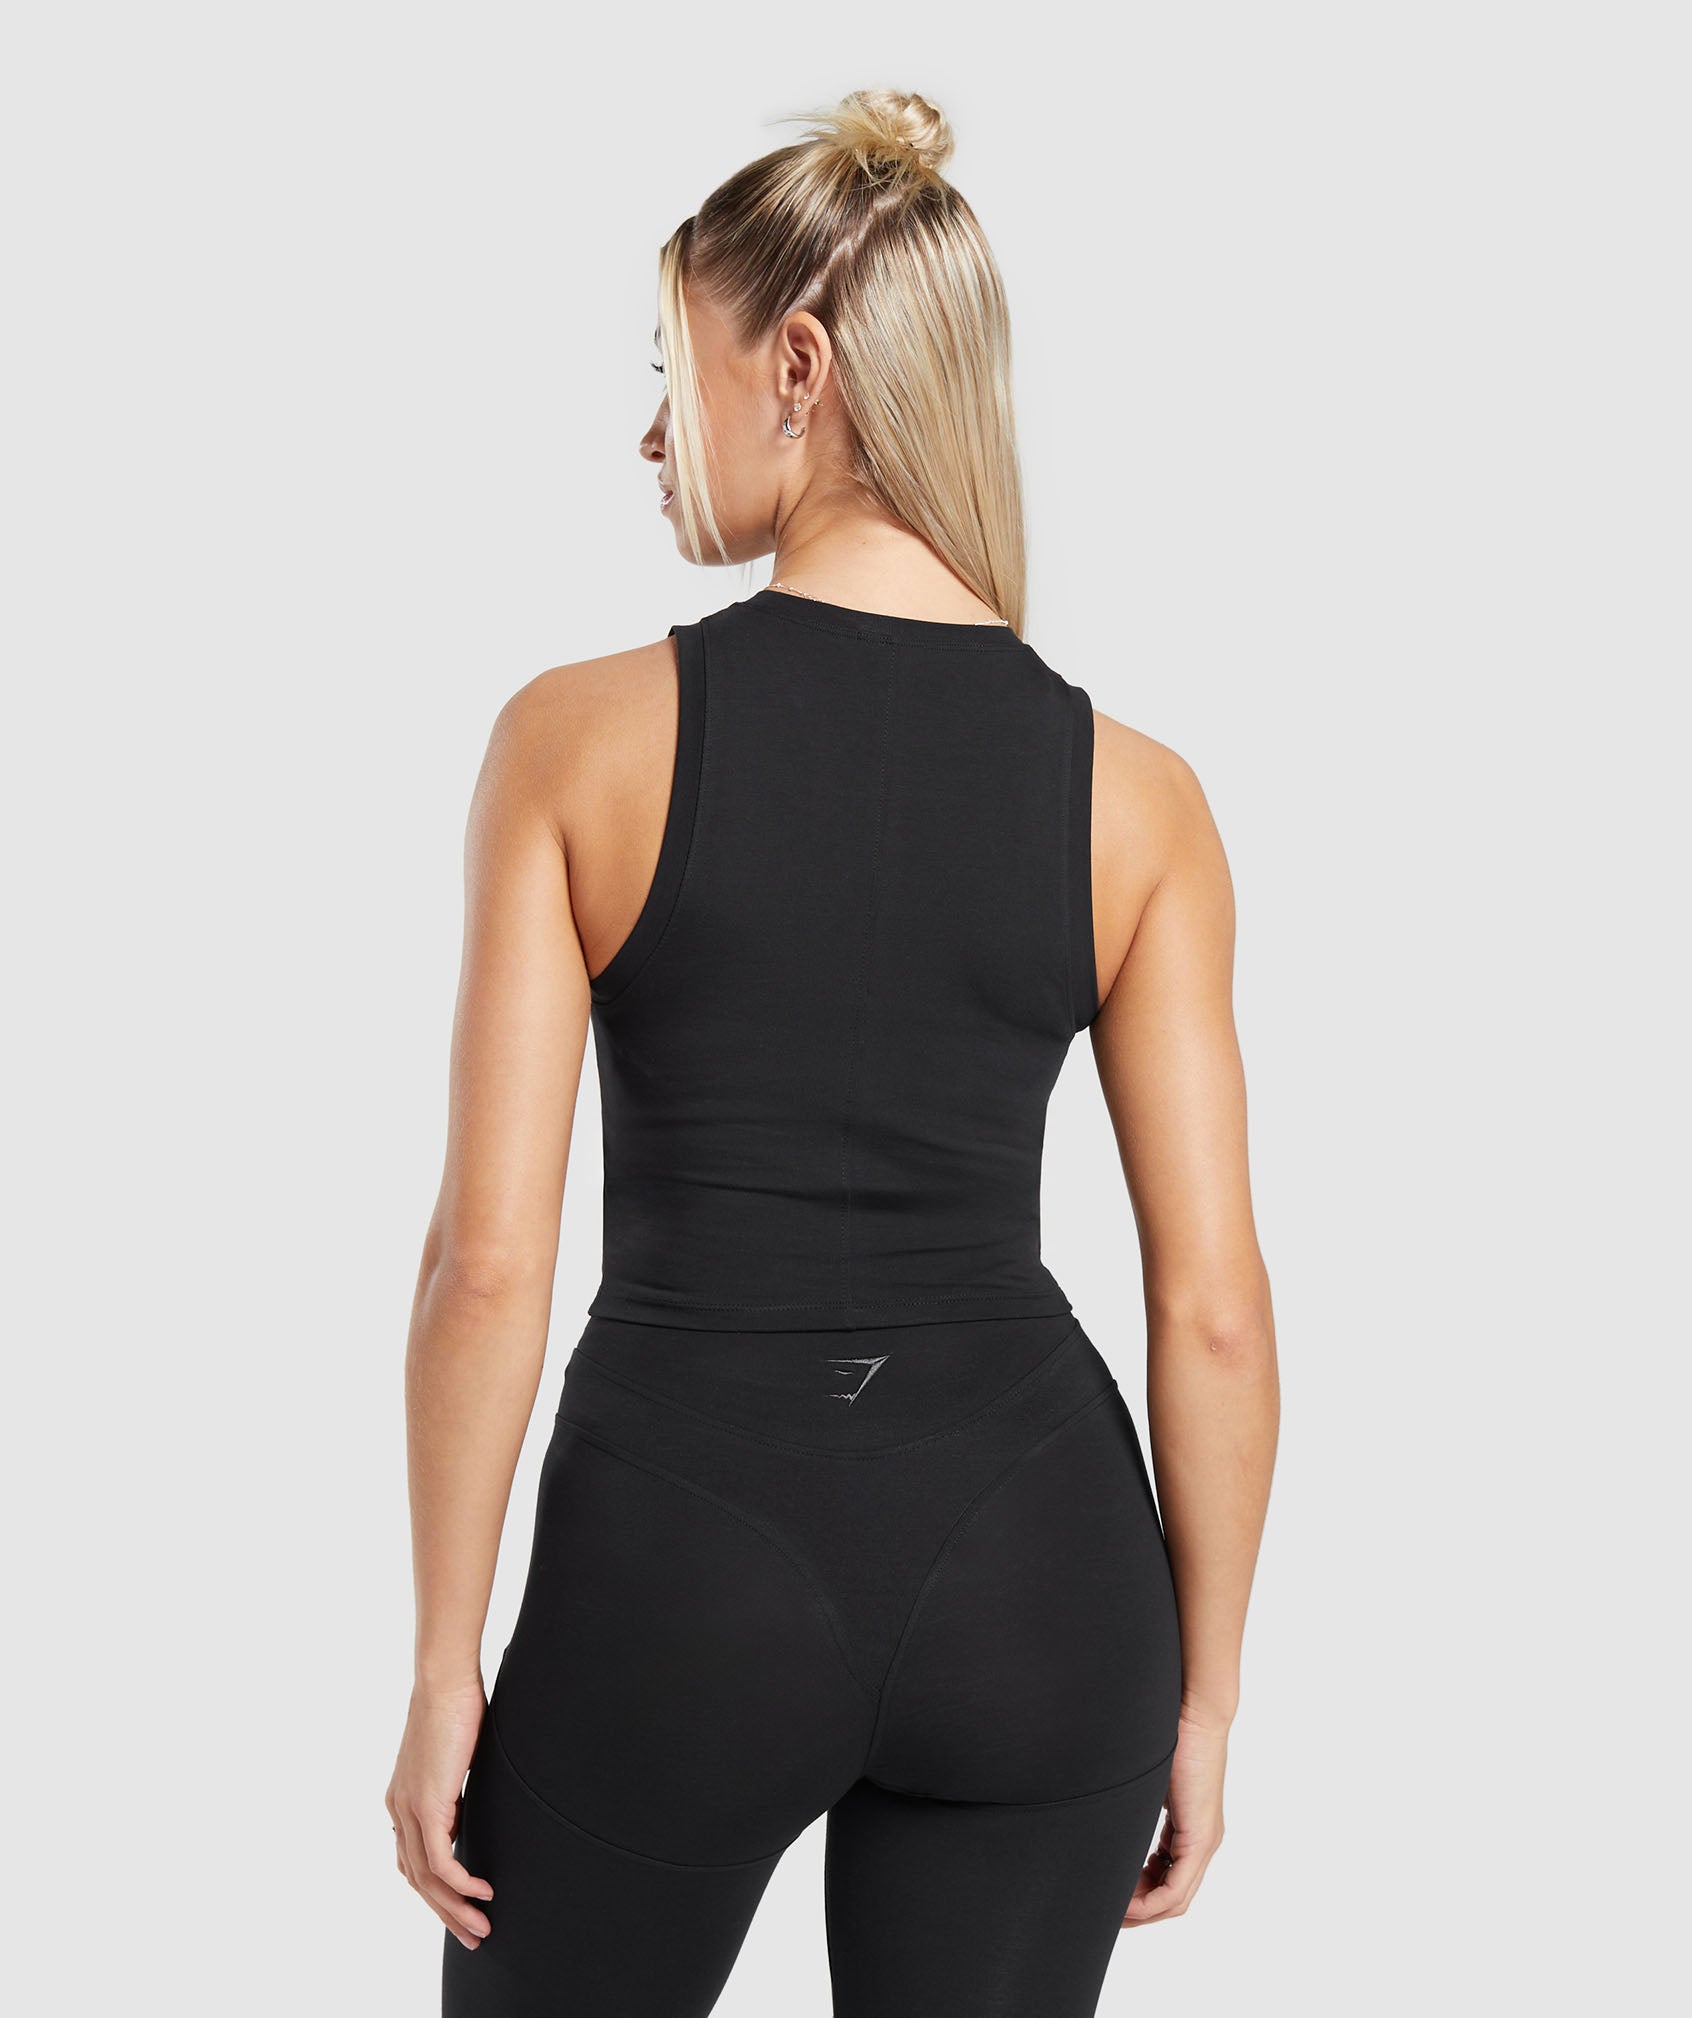 Rest Day Cotton Contour Tank in Black - view 2